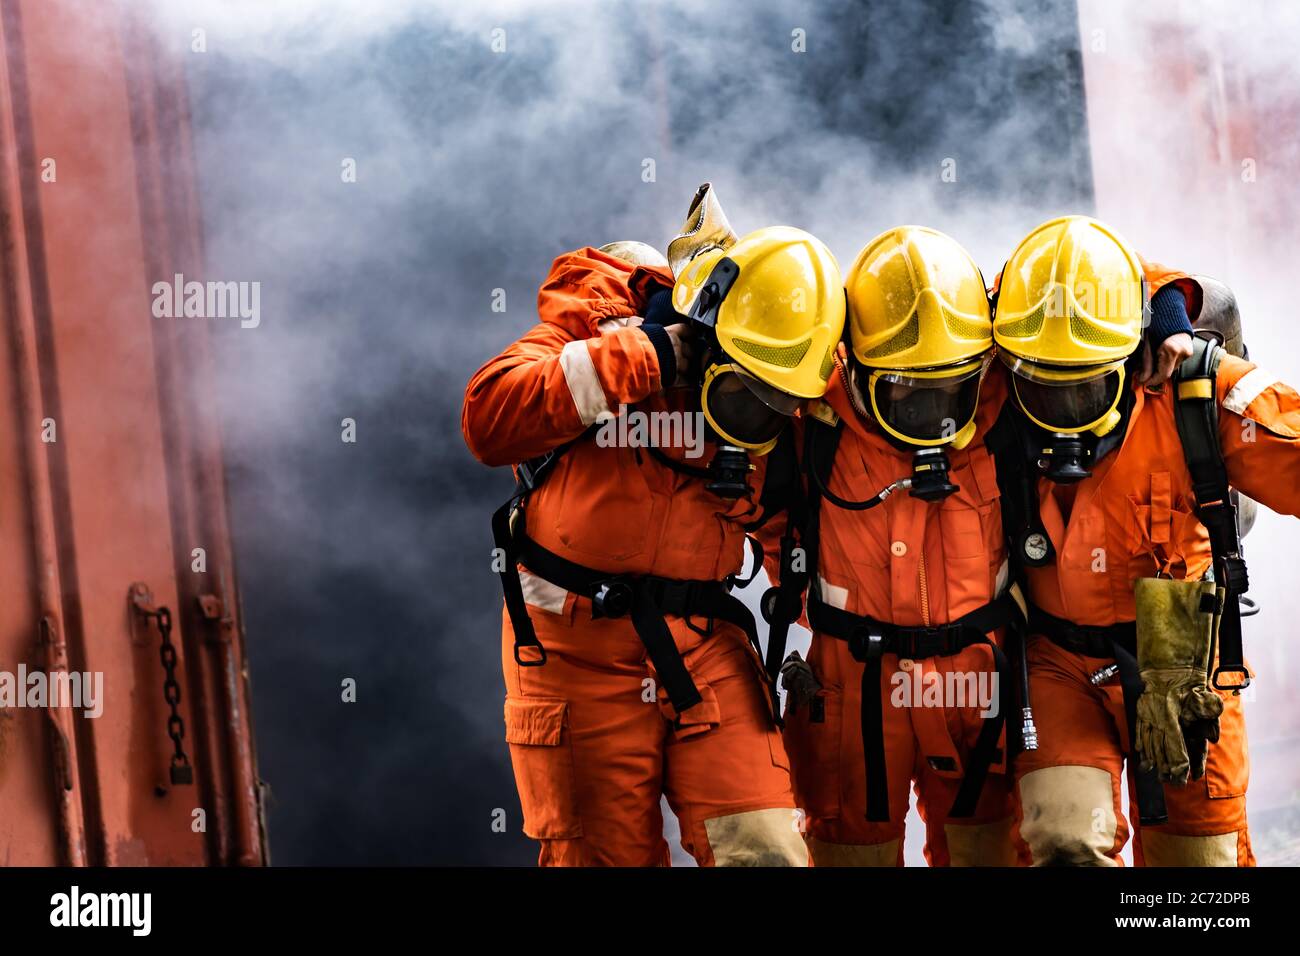 Asian firefighters rescue their team colleague from from burning building. Firefighter safety rescue from accident and public service concept. Stock Photo